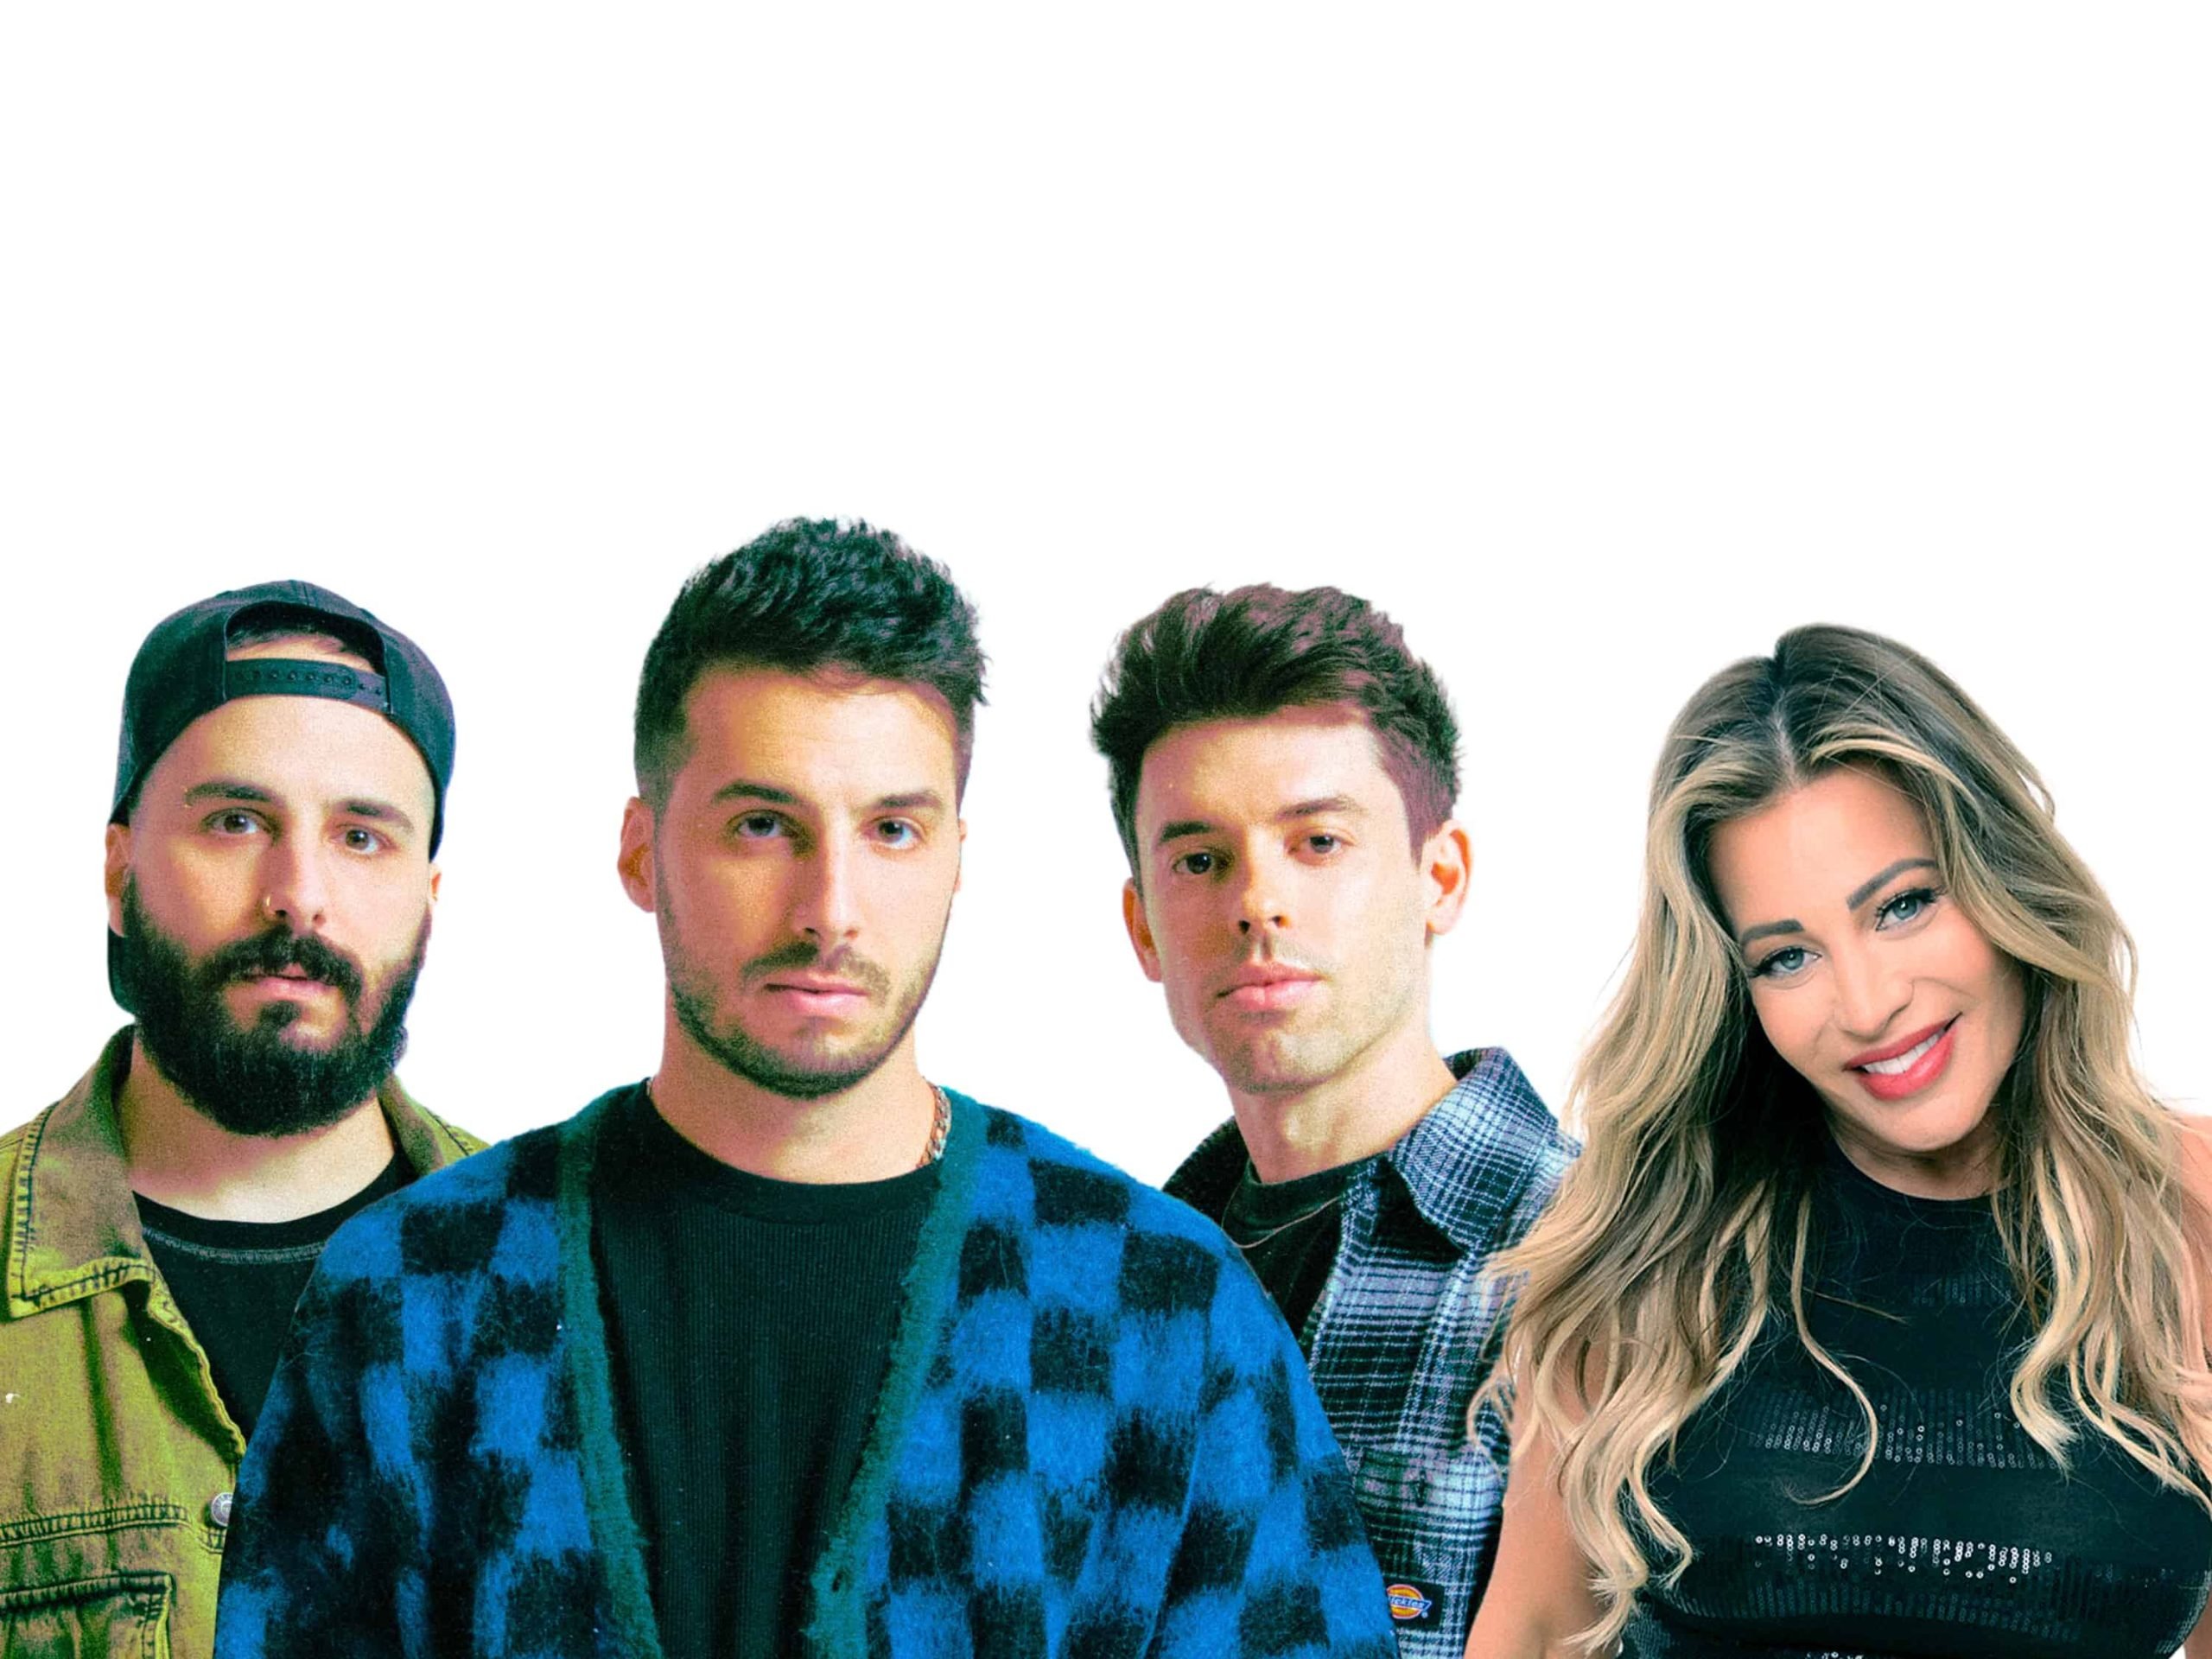 Cash Cash & Taylor Dayne team up for ‘Tell It To My Heart’: Listen